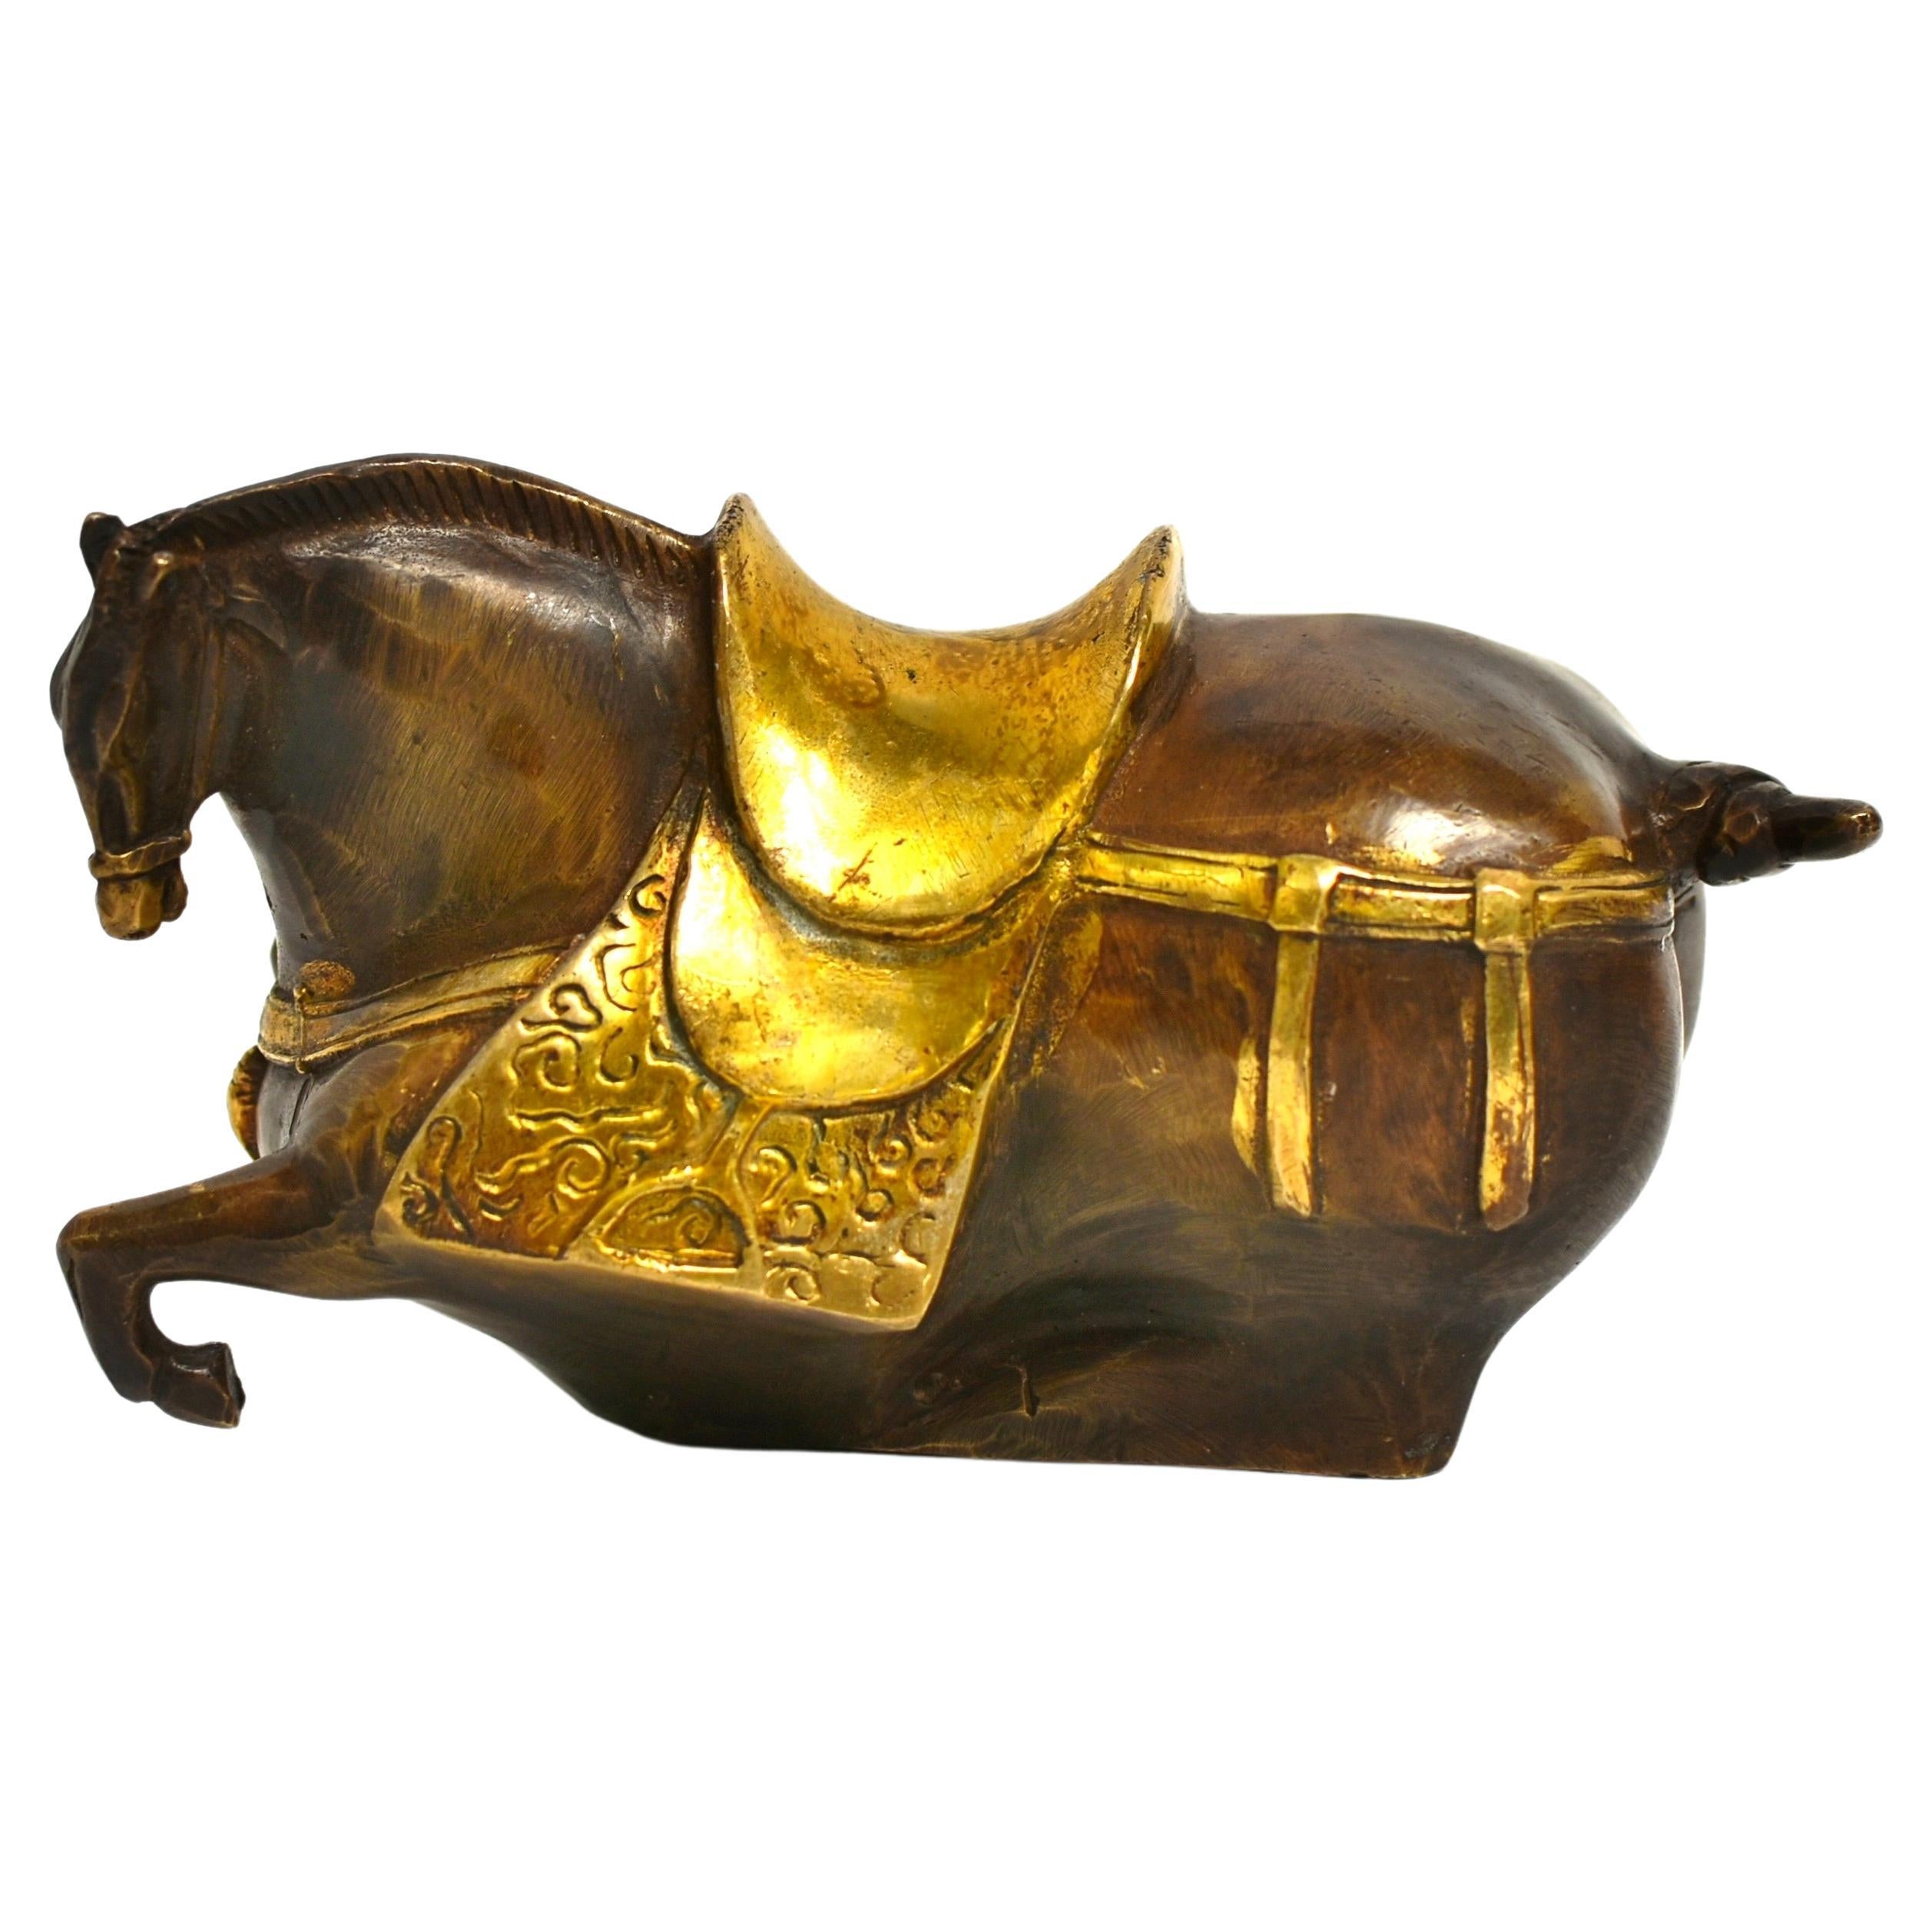 Bronze Recumbent Horse Han Style with Gilded Saddle For Sale